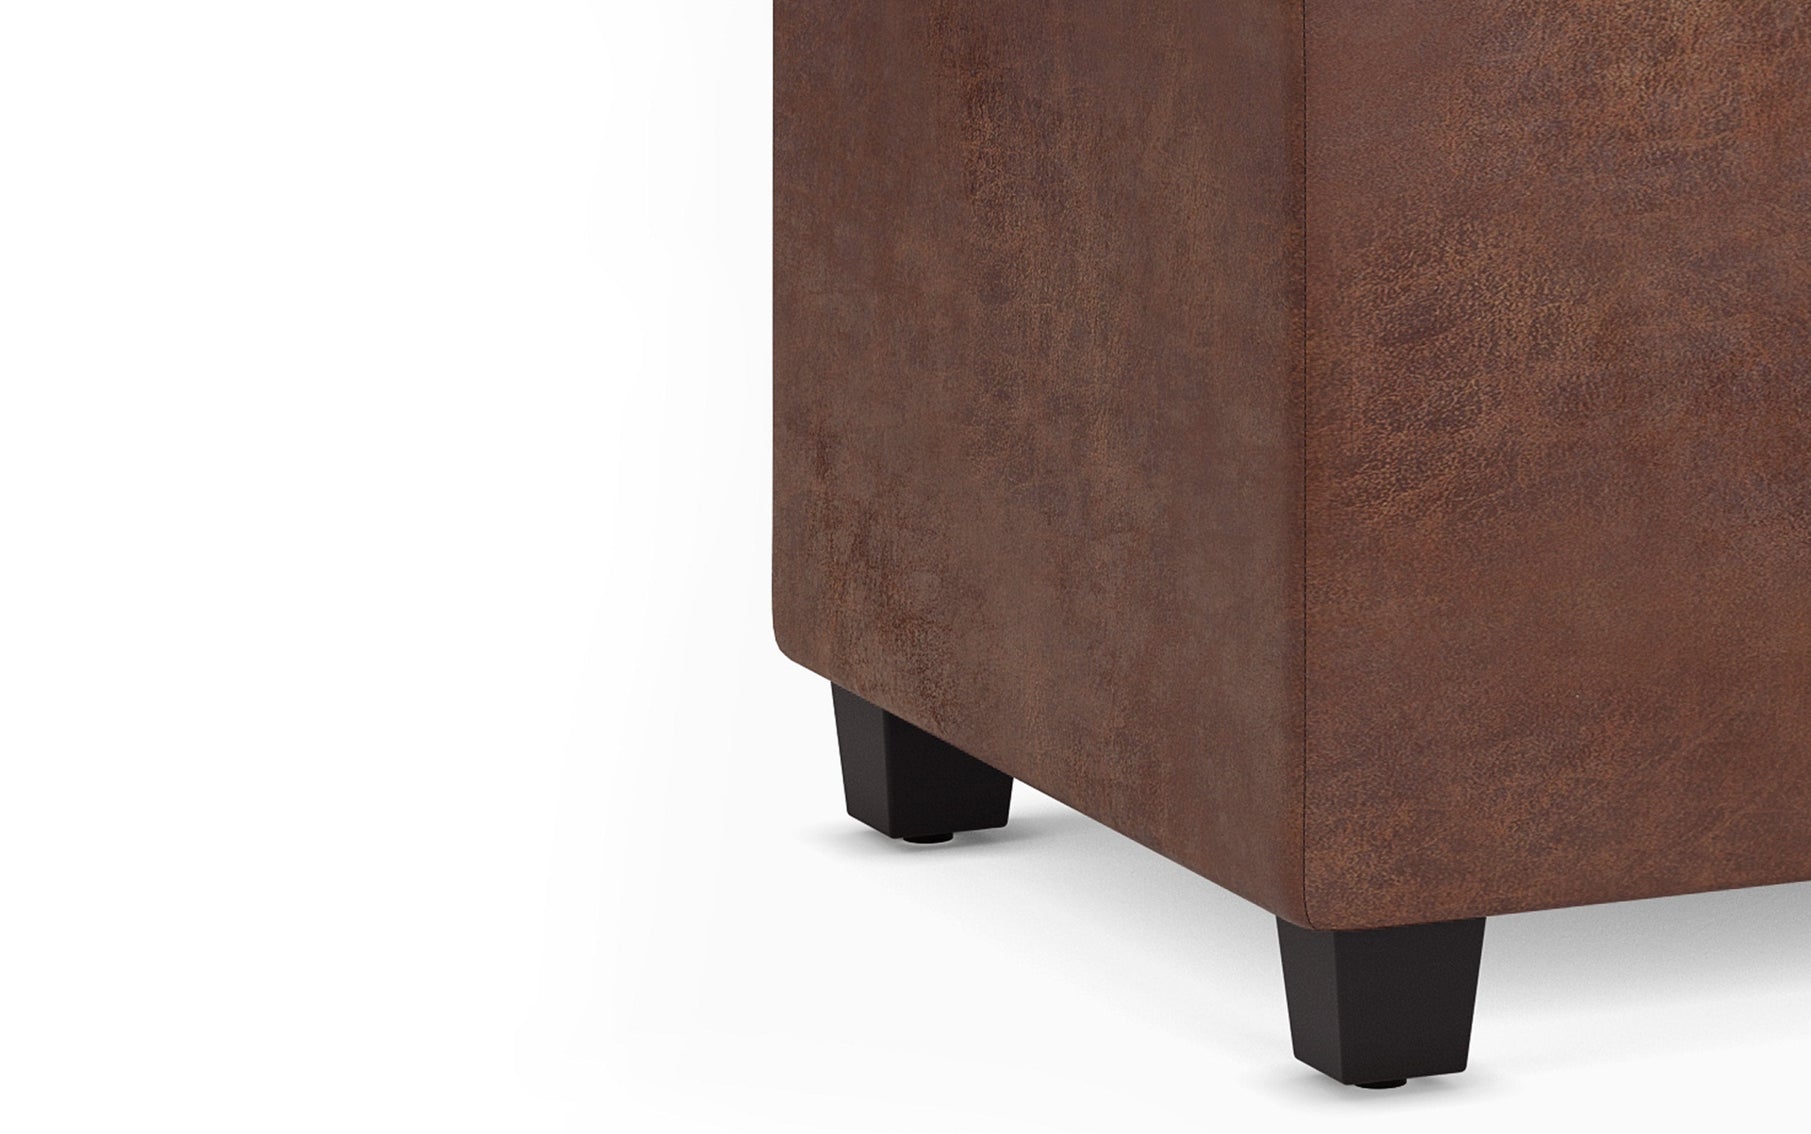 Distressed Saddle Brown Distressed Vegan Leather | Avalon Extra Large Storage Ottoman in Distressed Vegan Leather